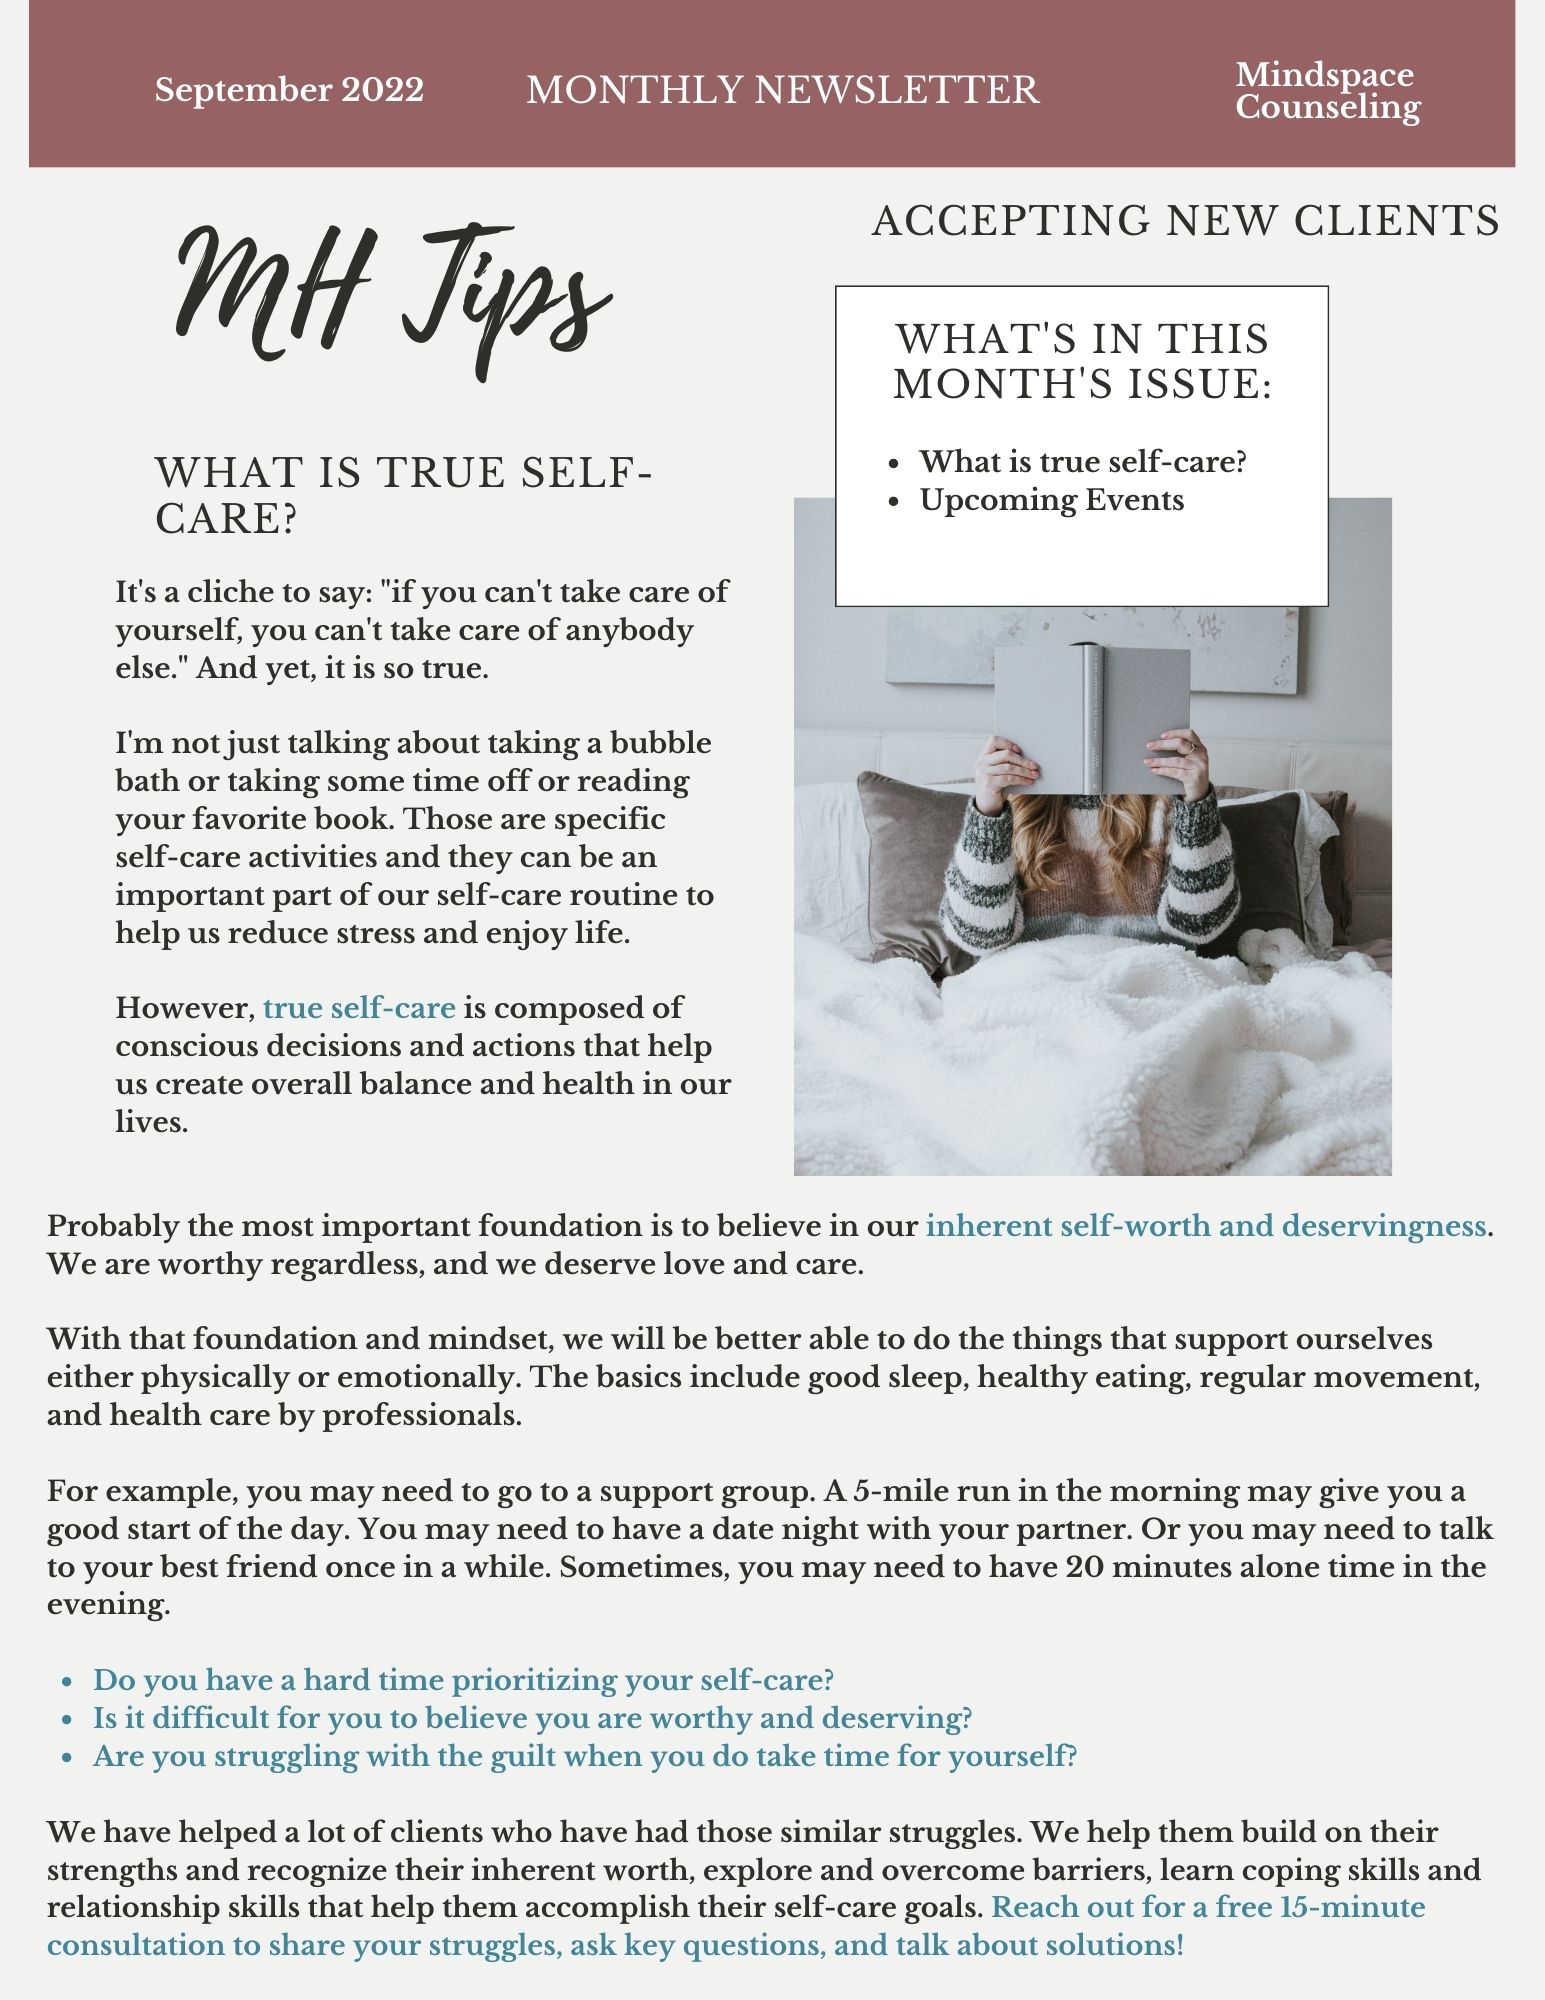 true self care. online therapy in NC to help you take better care of yourself and have more balance in your emotions and relationships.